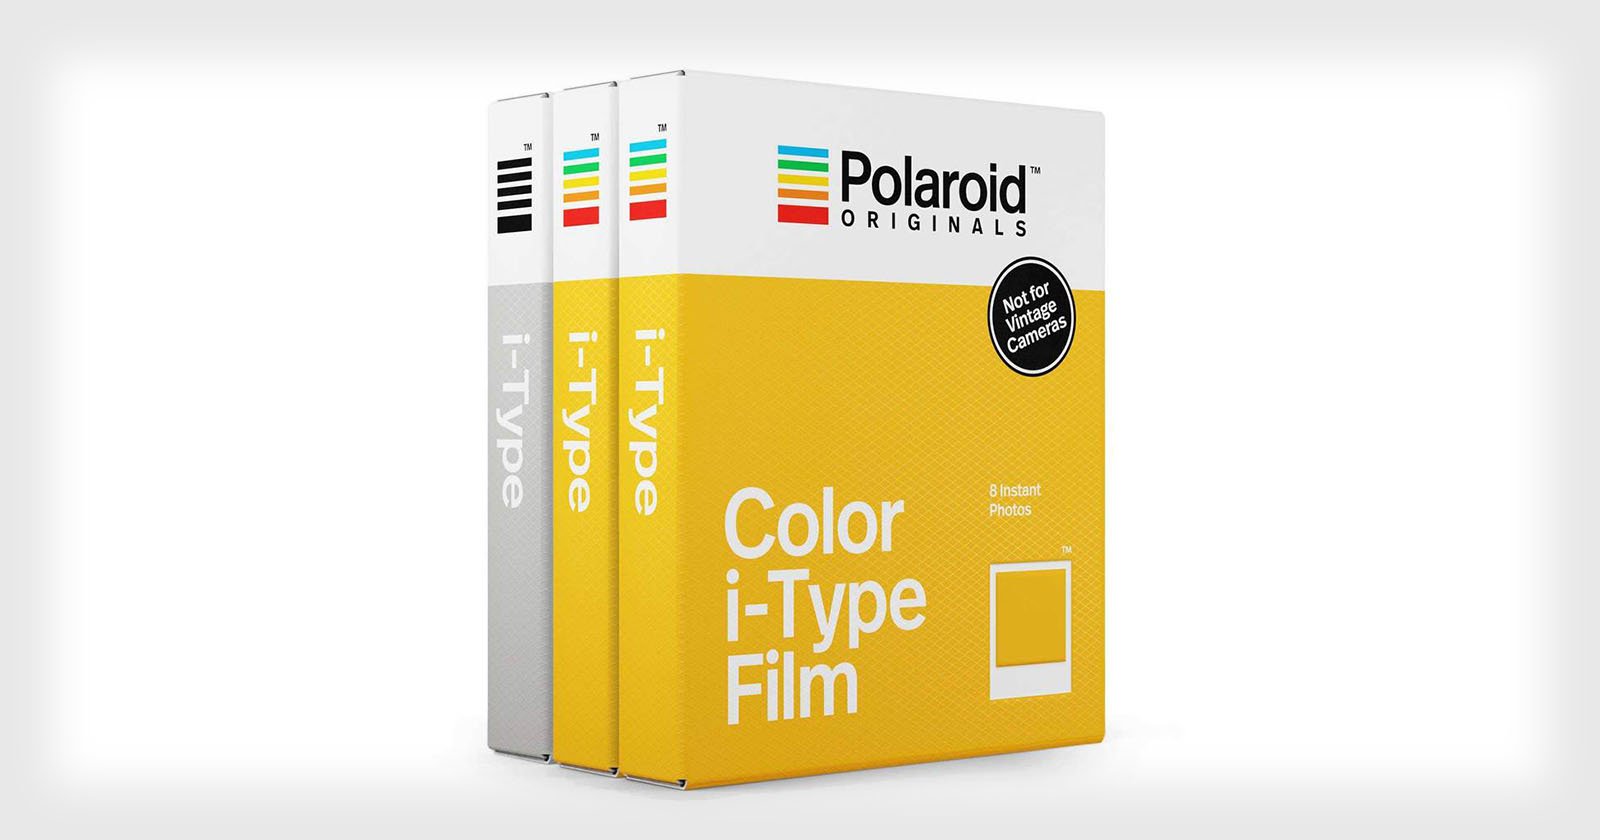 Polaroid Color 600 Film Review & Shooting Guide